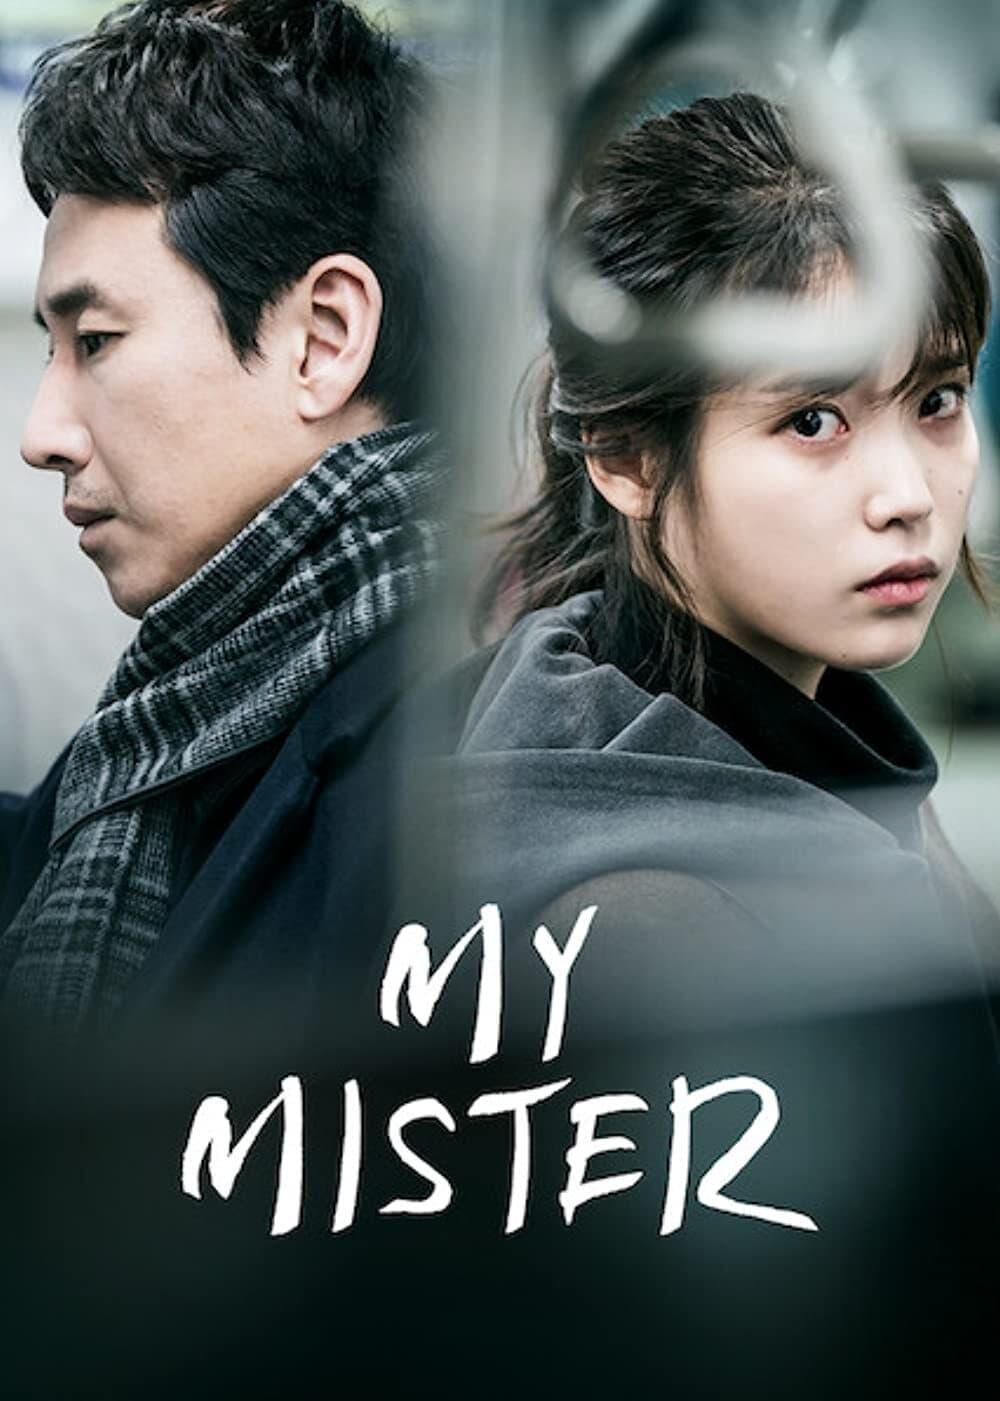 My Mister poster